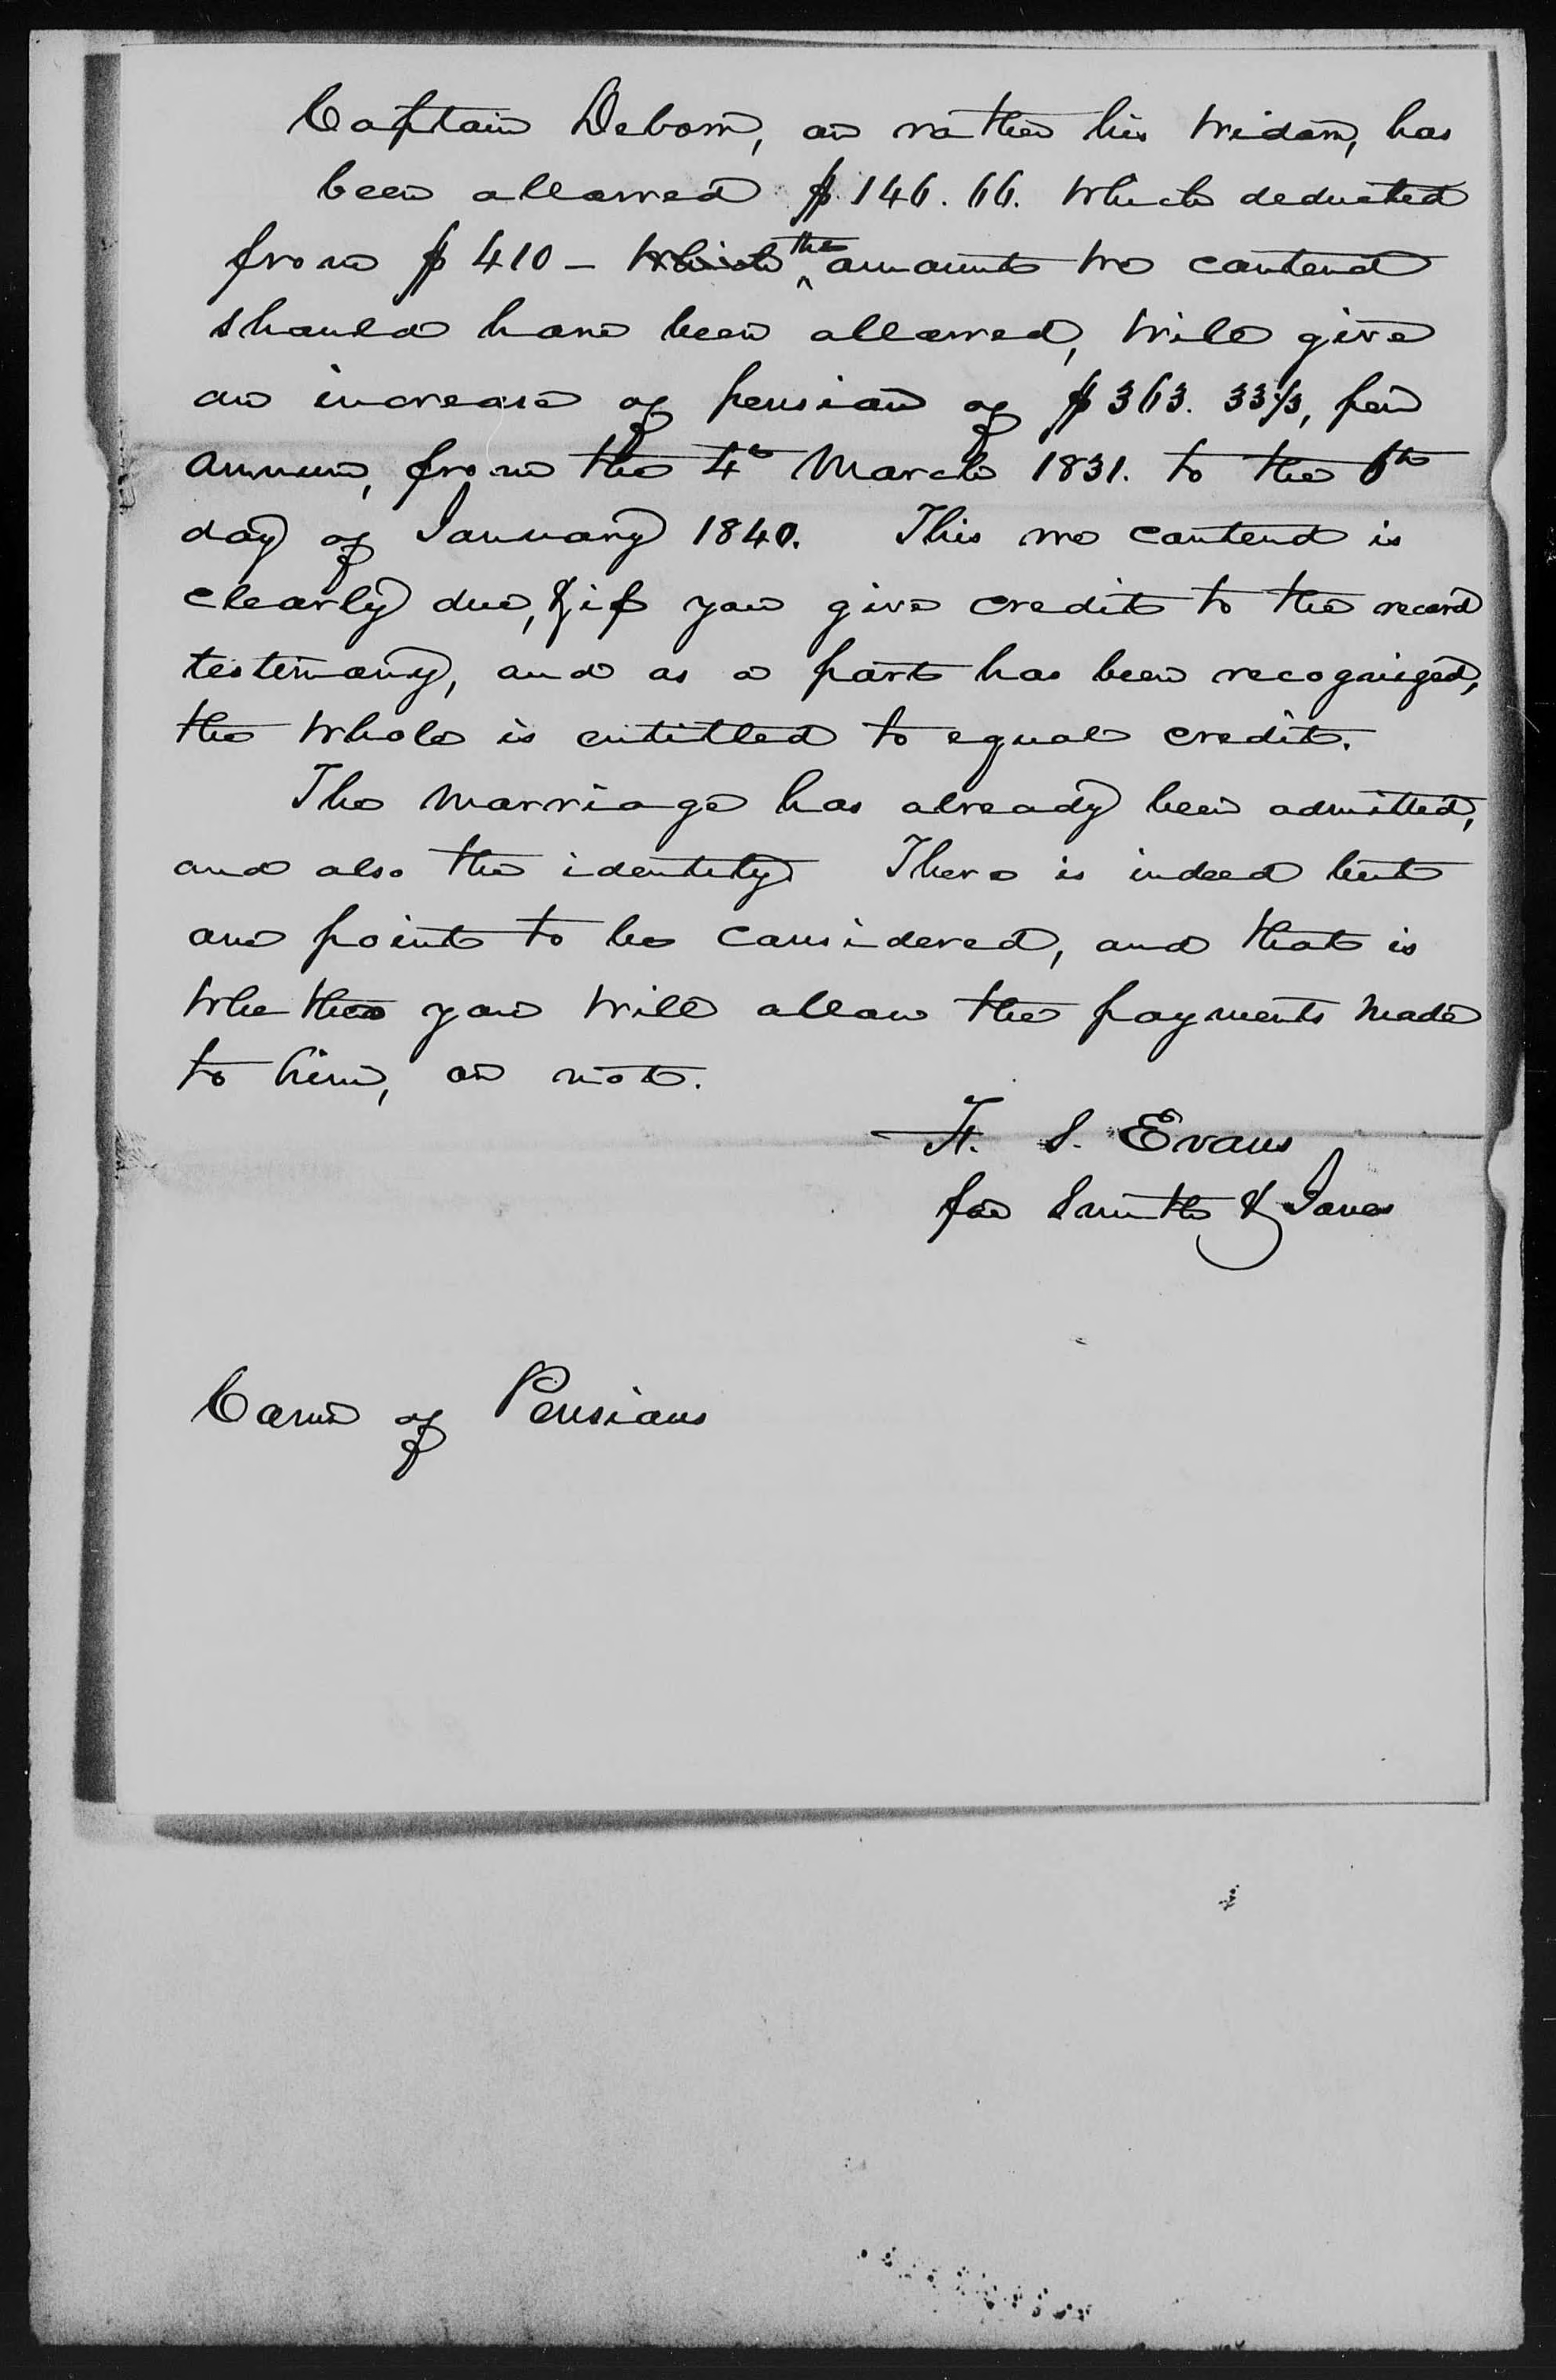 Report of the Pension of Rachel Debow from H. S. Evans to James Ewell Heath, circa 1851, page 3